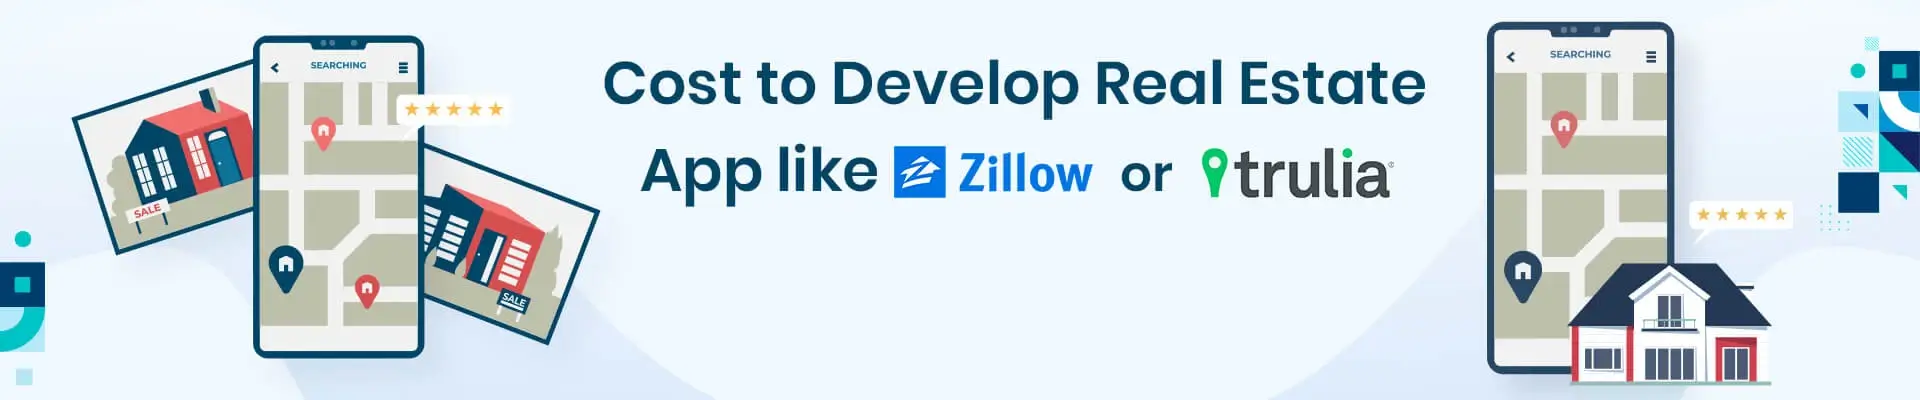 Real Estate App Development: How Much Does it Cost to Develop An App like Zillow or Trulia?